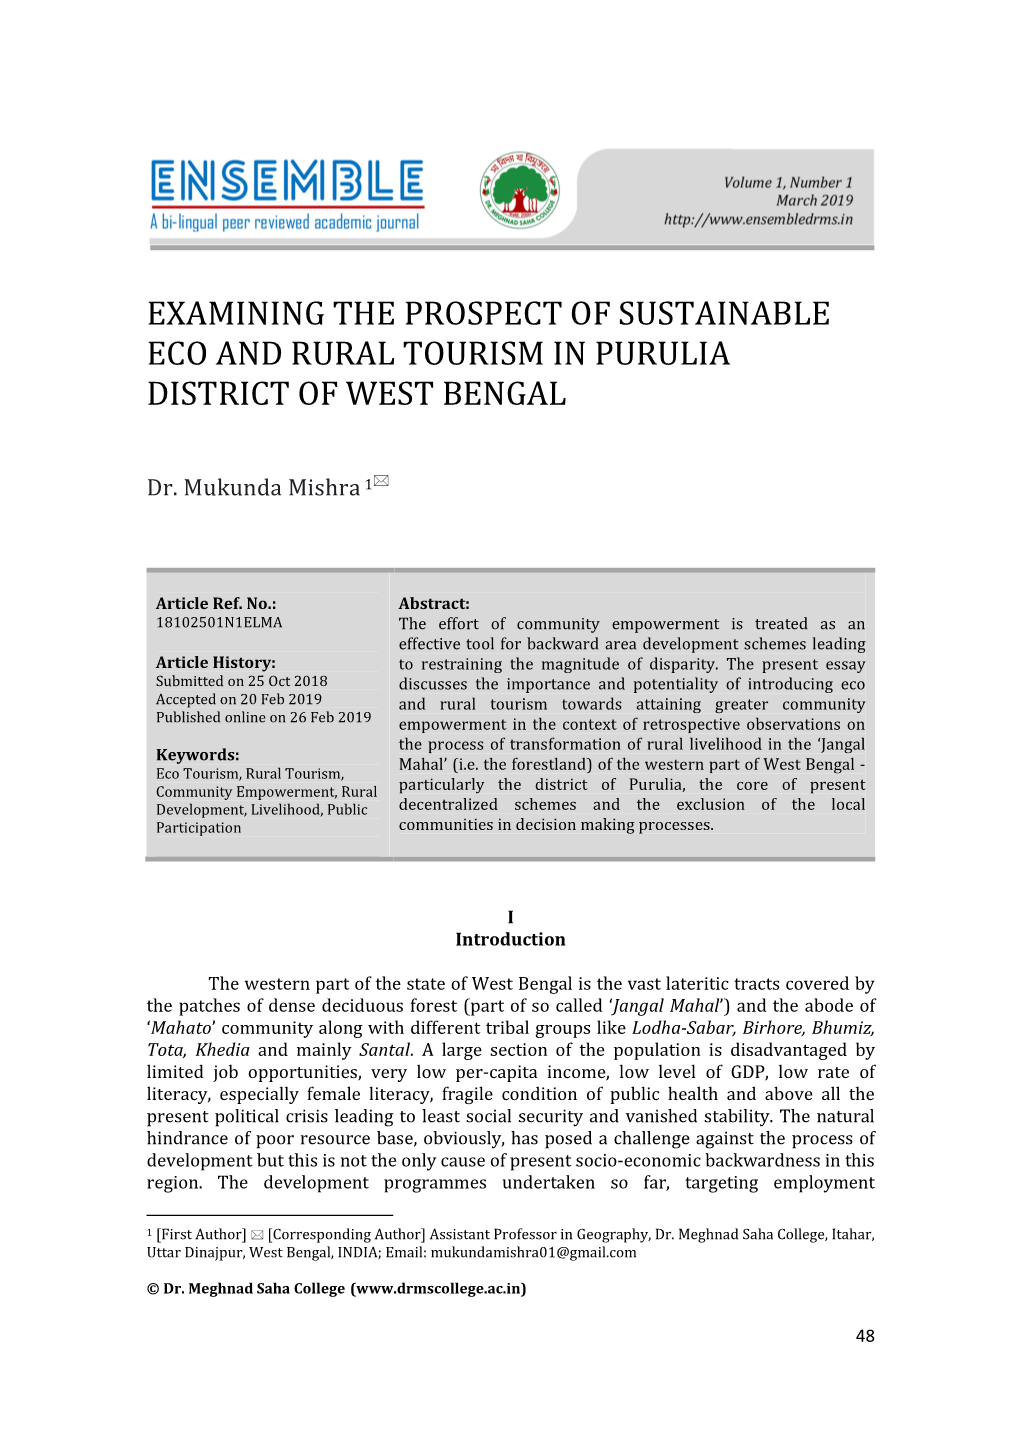 Examining the Prospect of Sustainable Eco and Rural Tourism in Purulia District of West Bengal